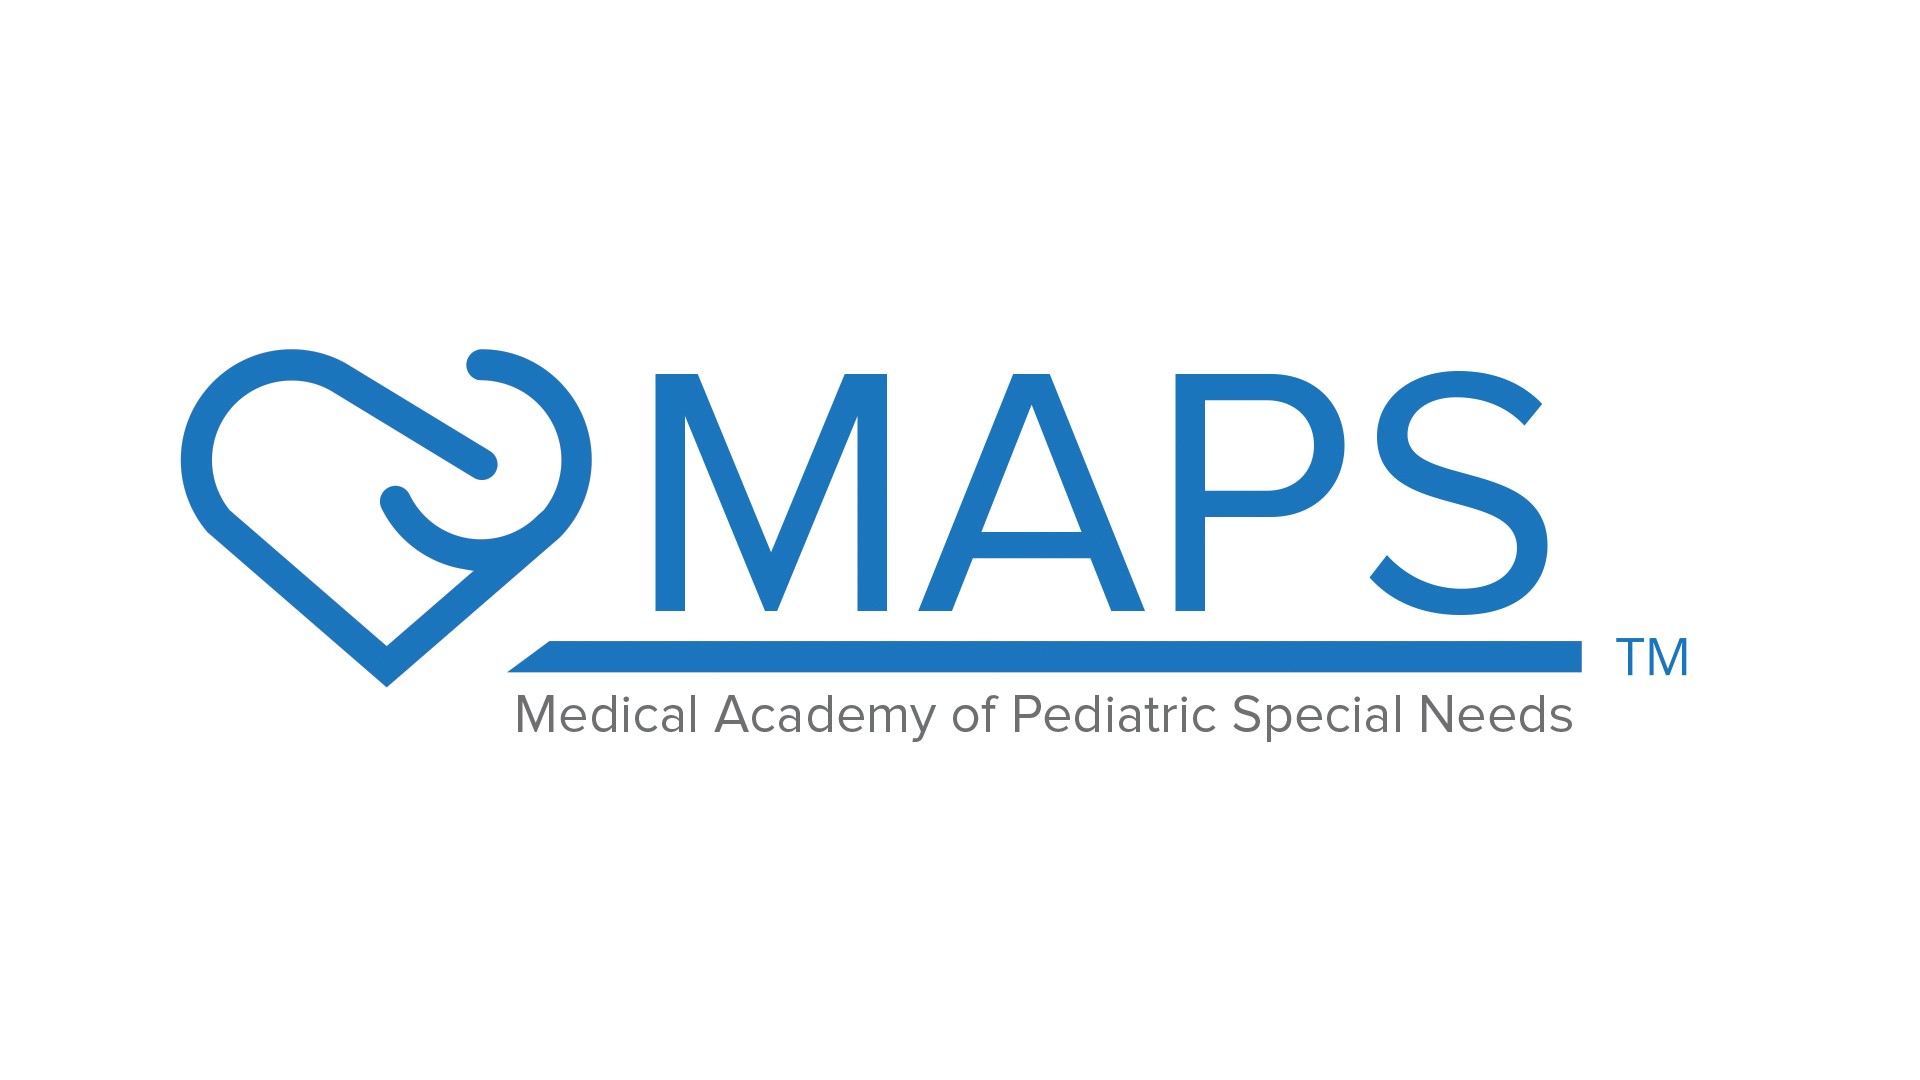 The Medical Academy of Pediatric Special Needs